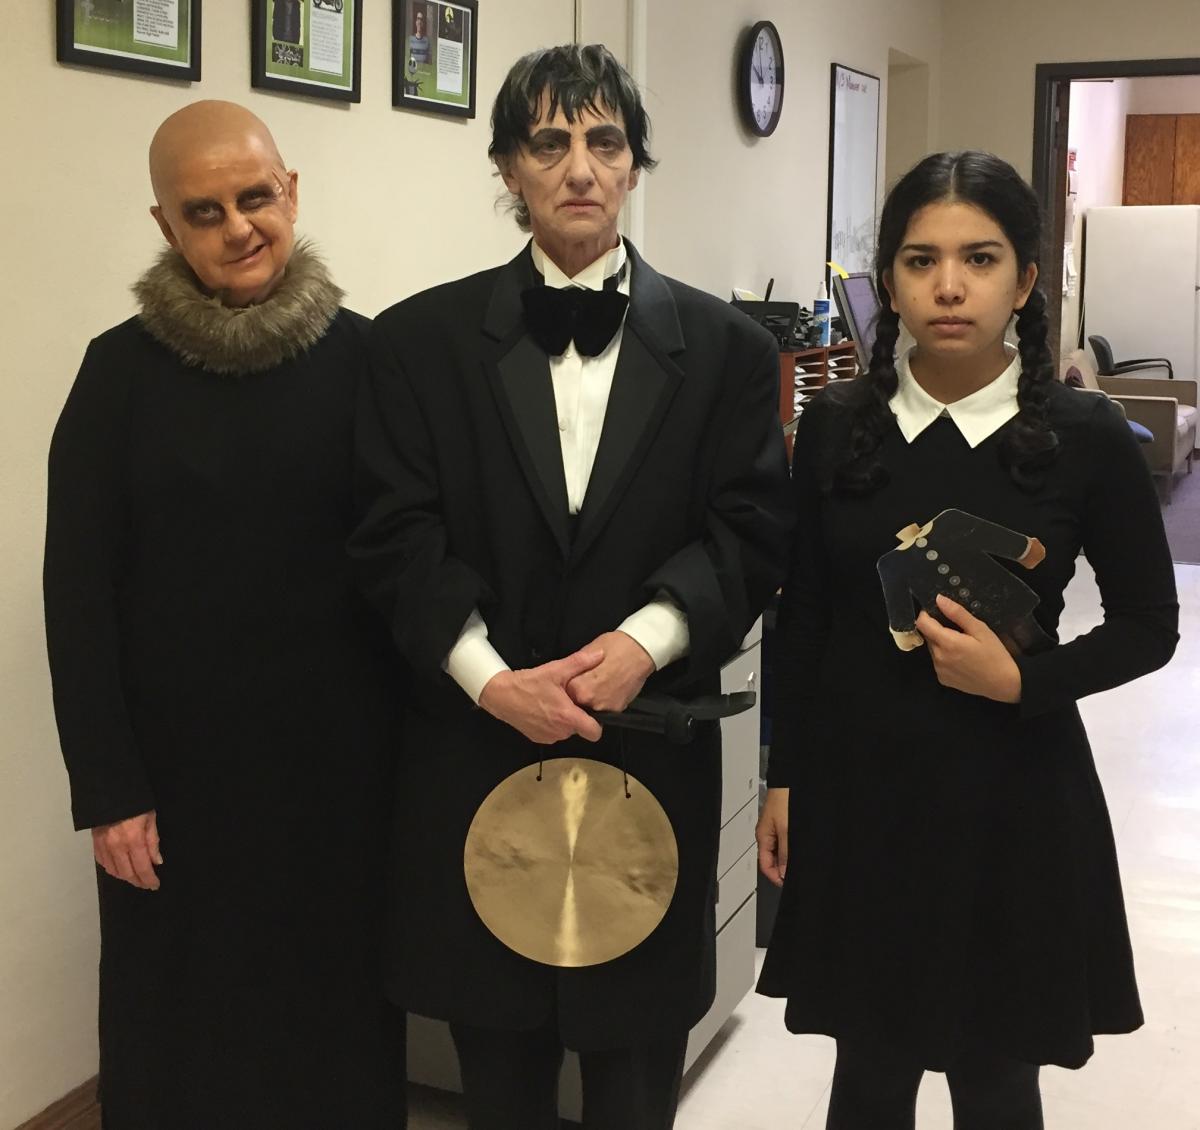 Fester and Lurch Costumes